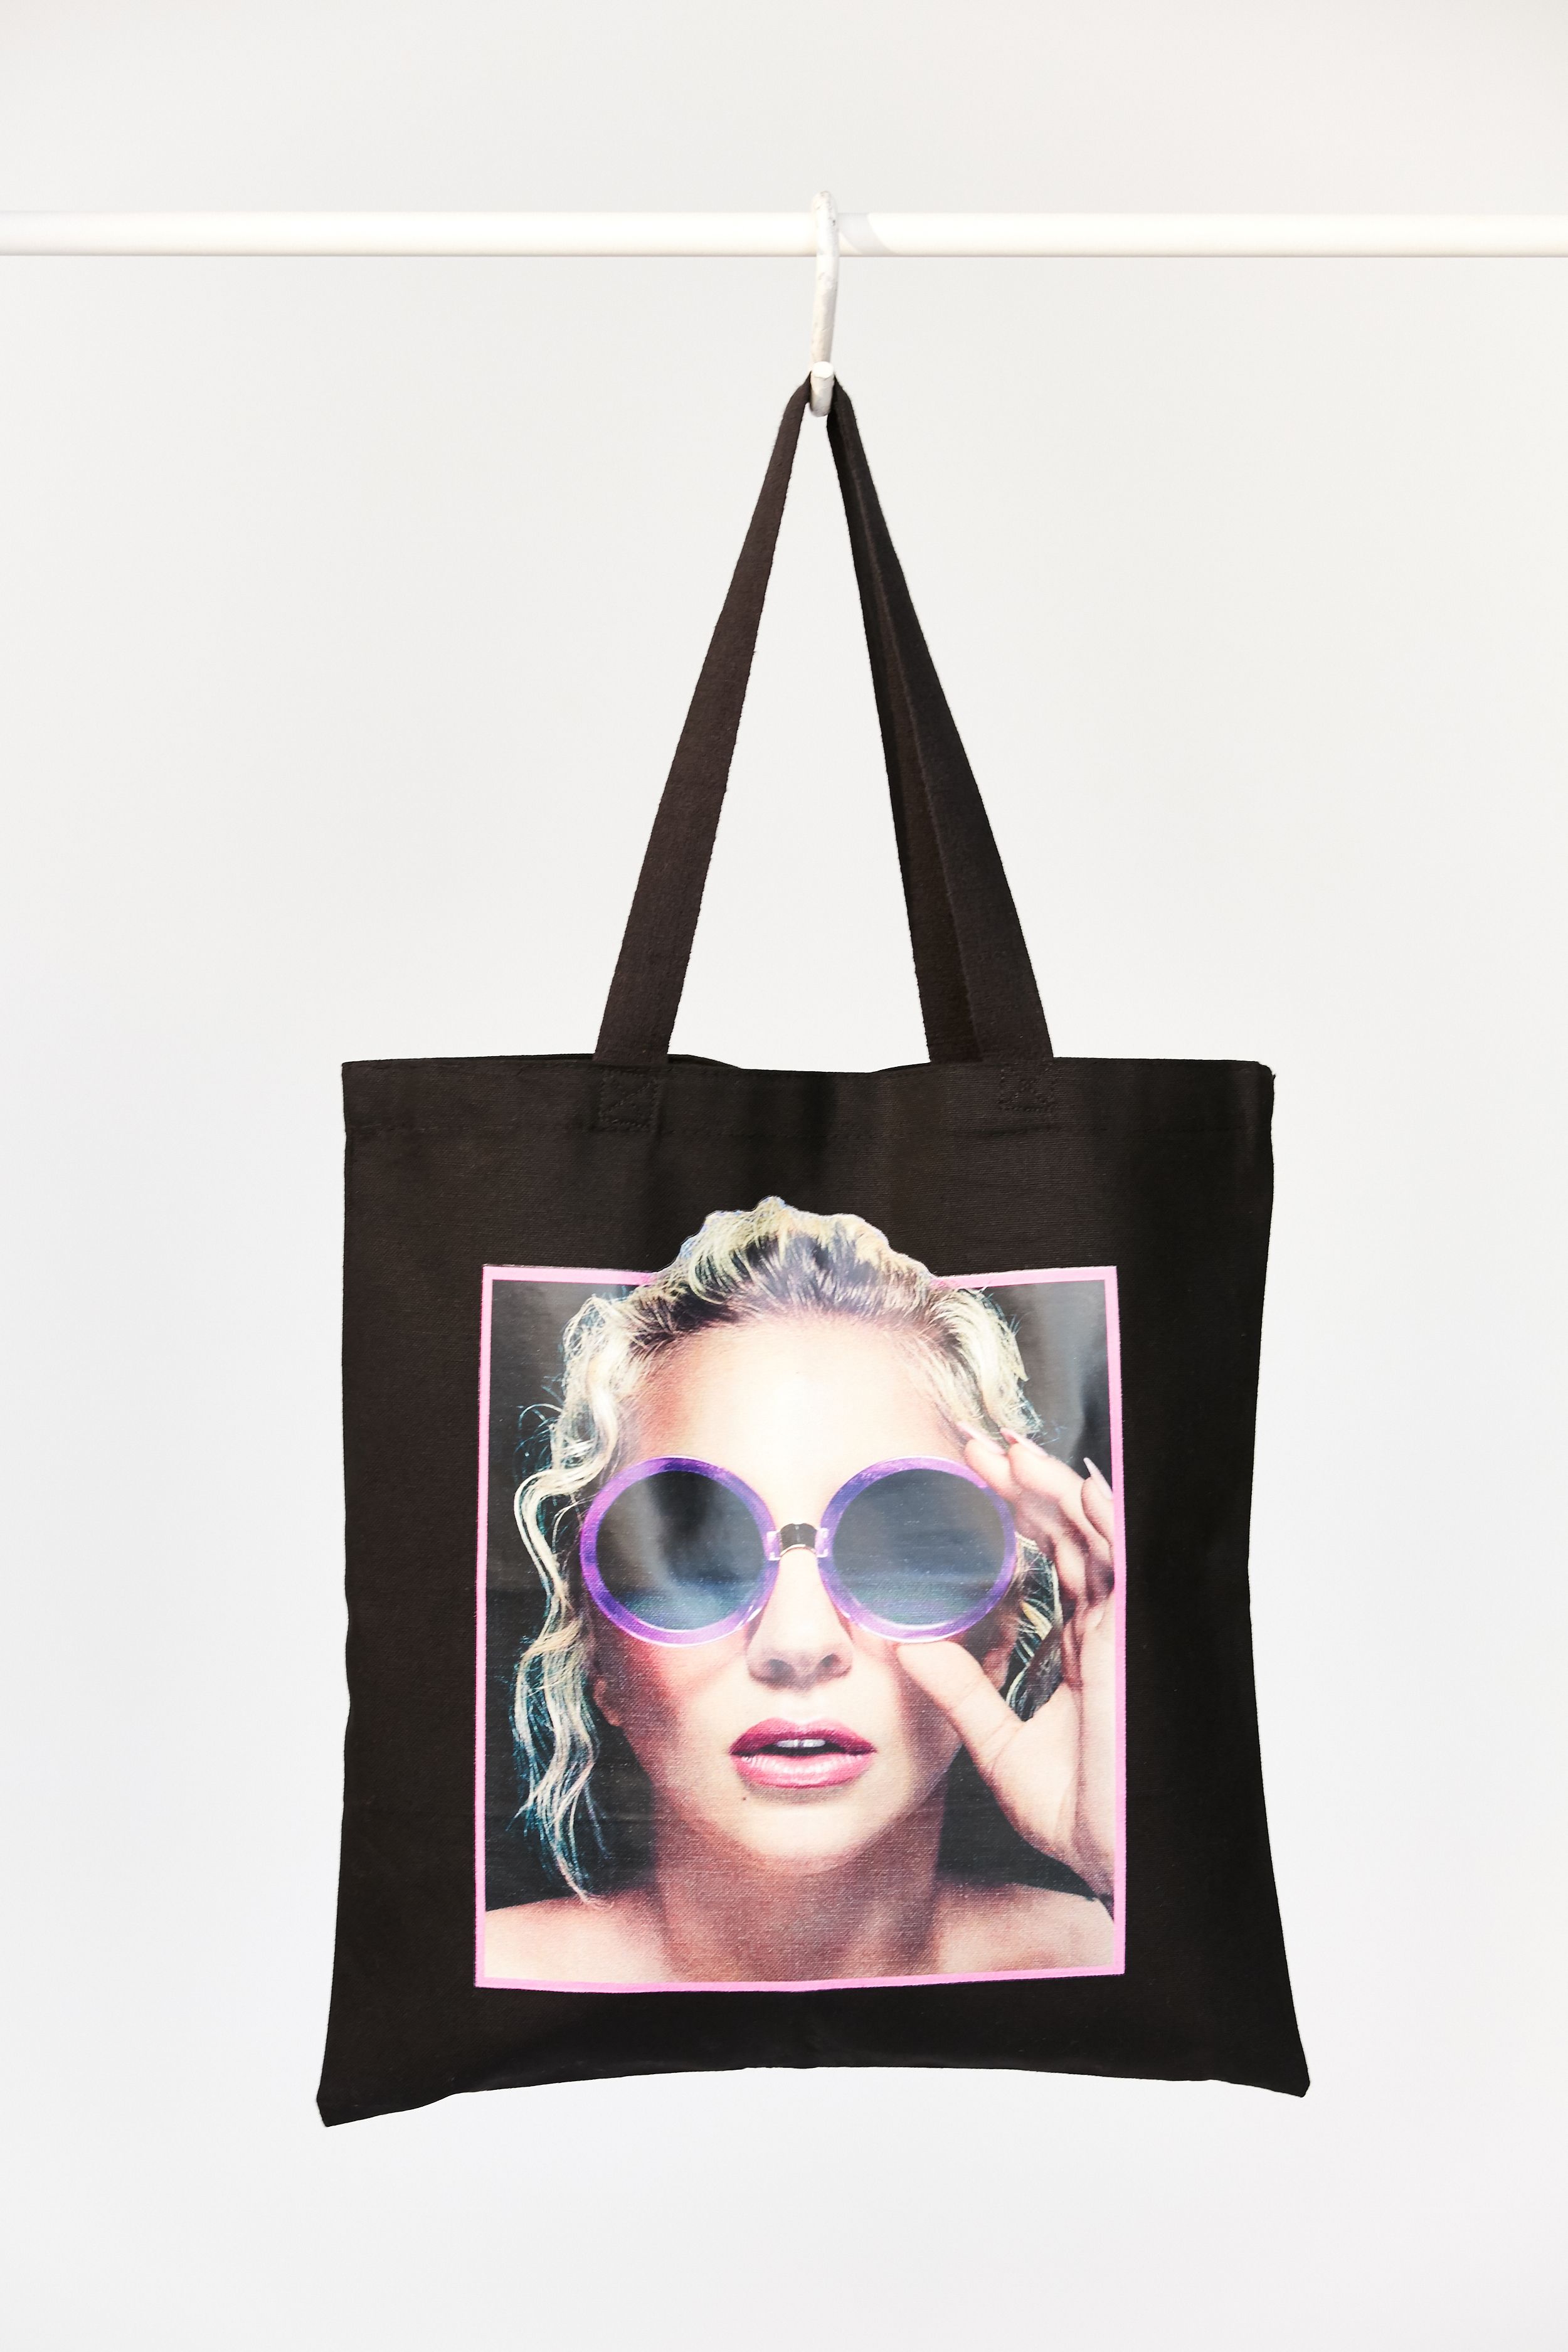 Lady Gaga Urban Outfitters Clothing Line - Joanne Tour Merchandise